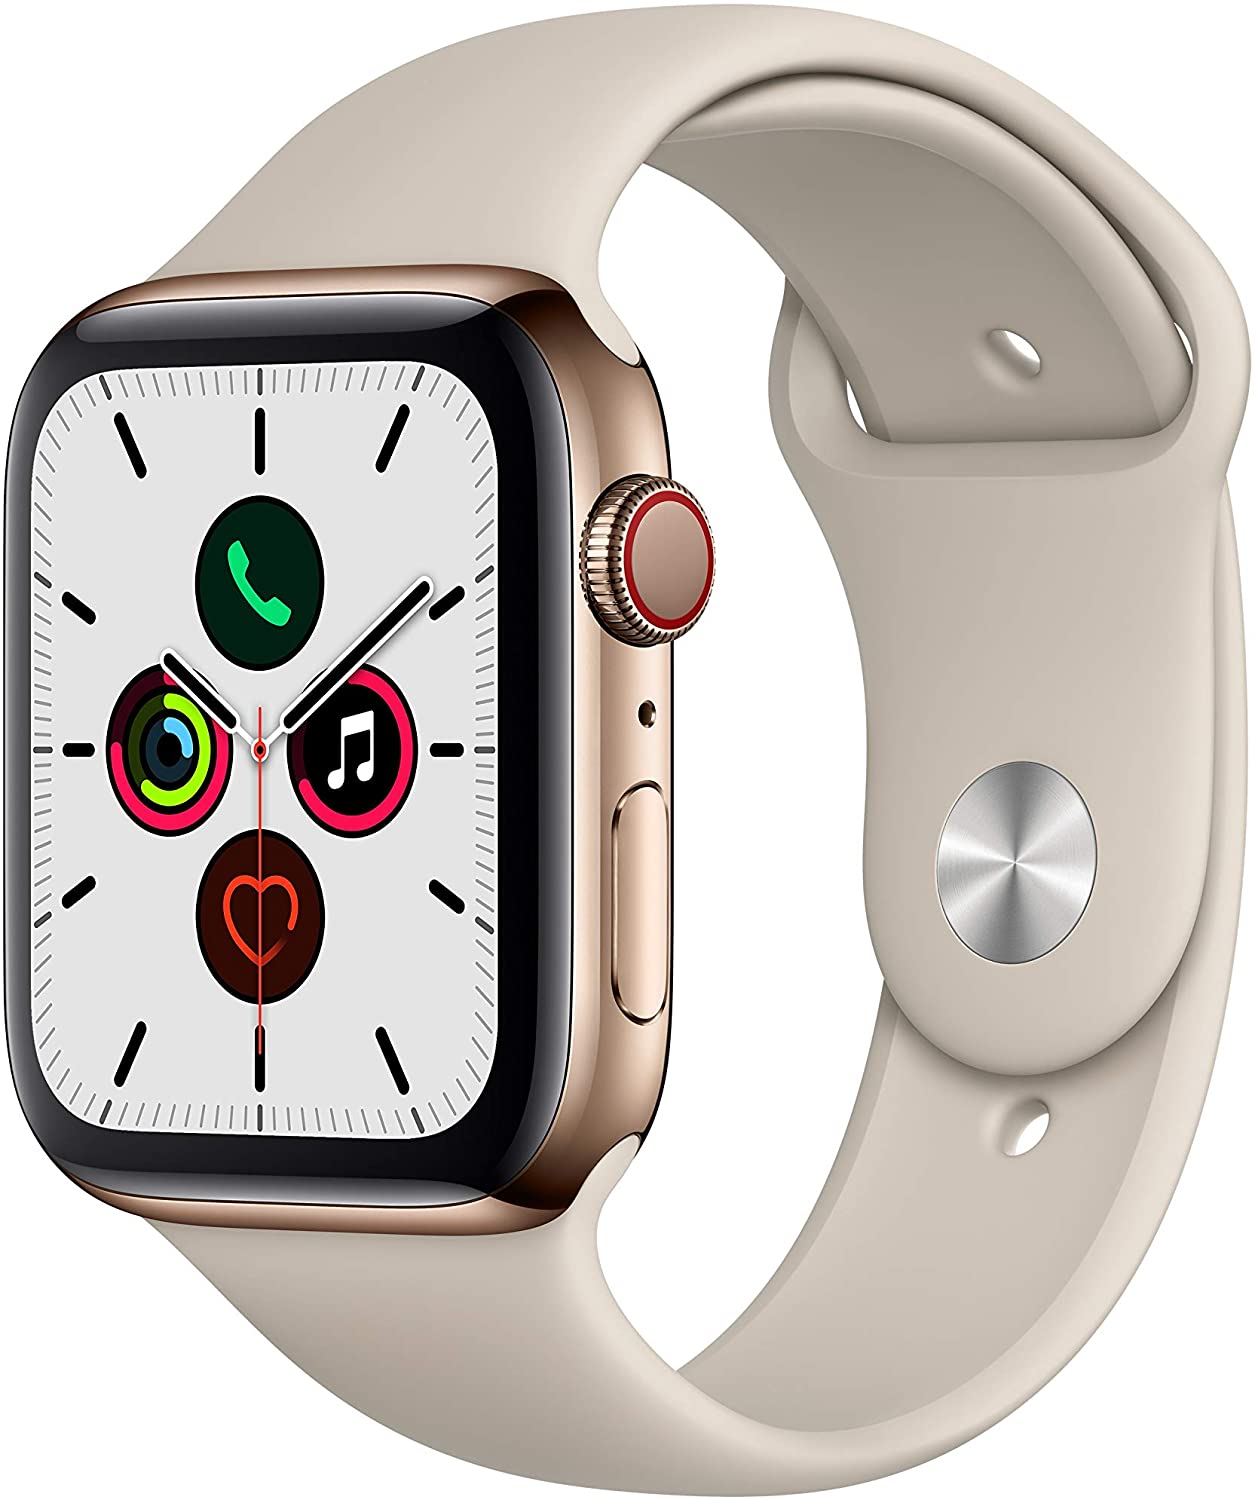 Apple Watch Series 5 (2019) 44mm GPS + Cellular - Gold Stainless Steel Case &amp; Stone Sport Band (Refurbished)